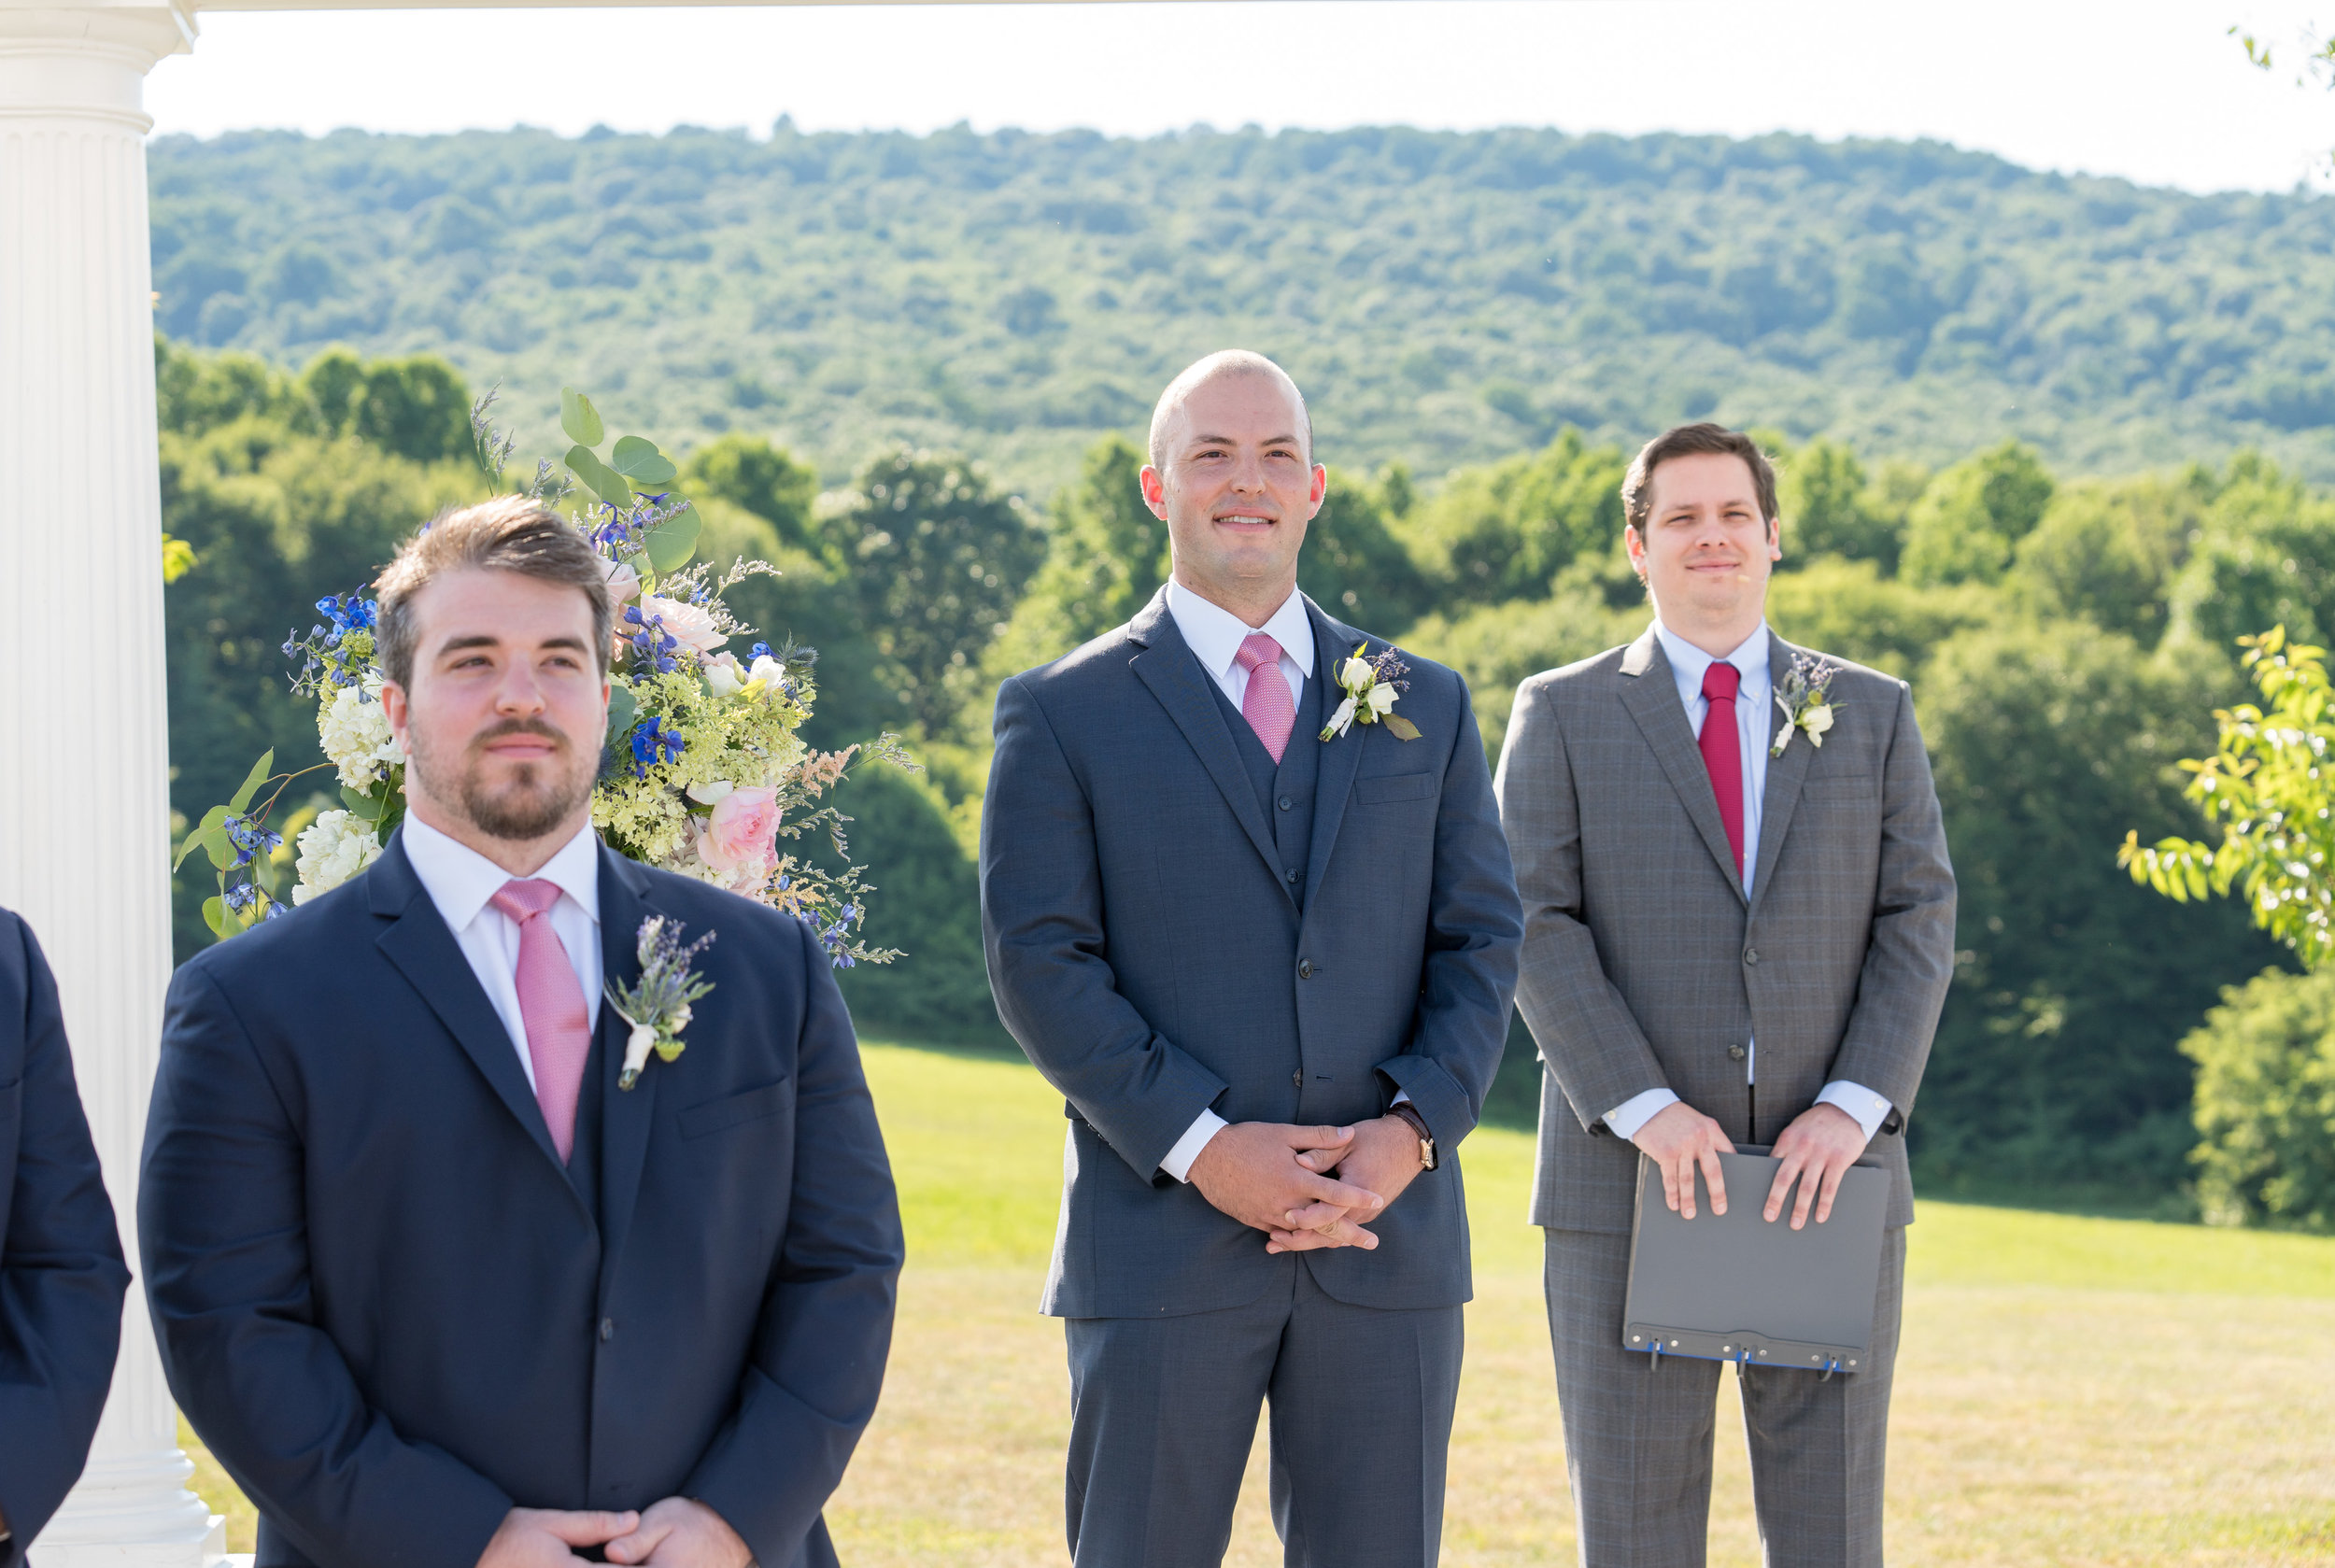 Wedding ceremony photos at Springfield Manor Winery and Distillery